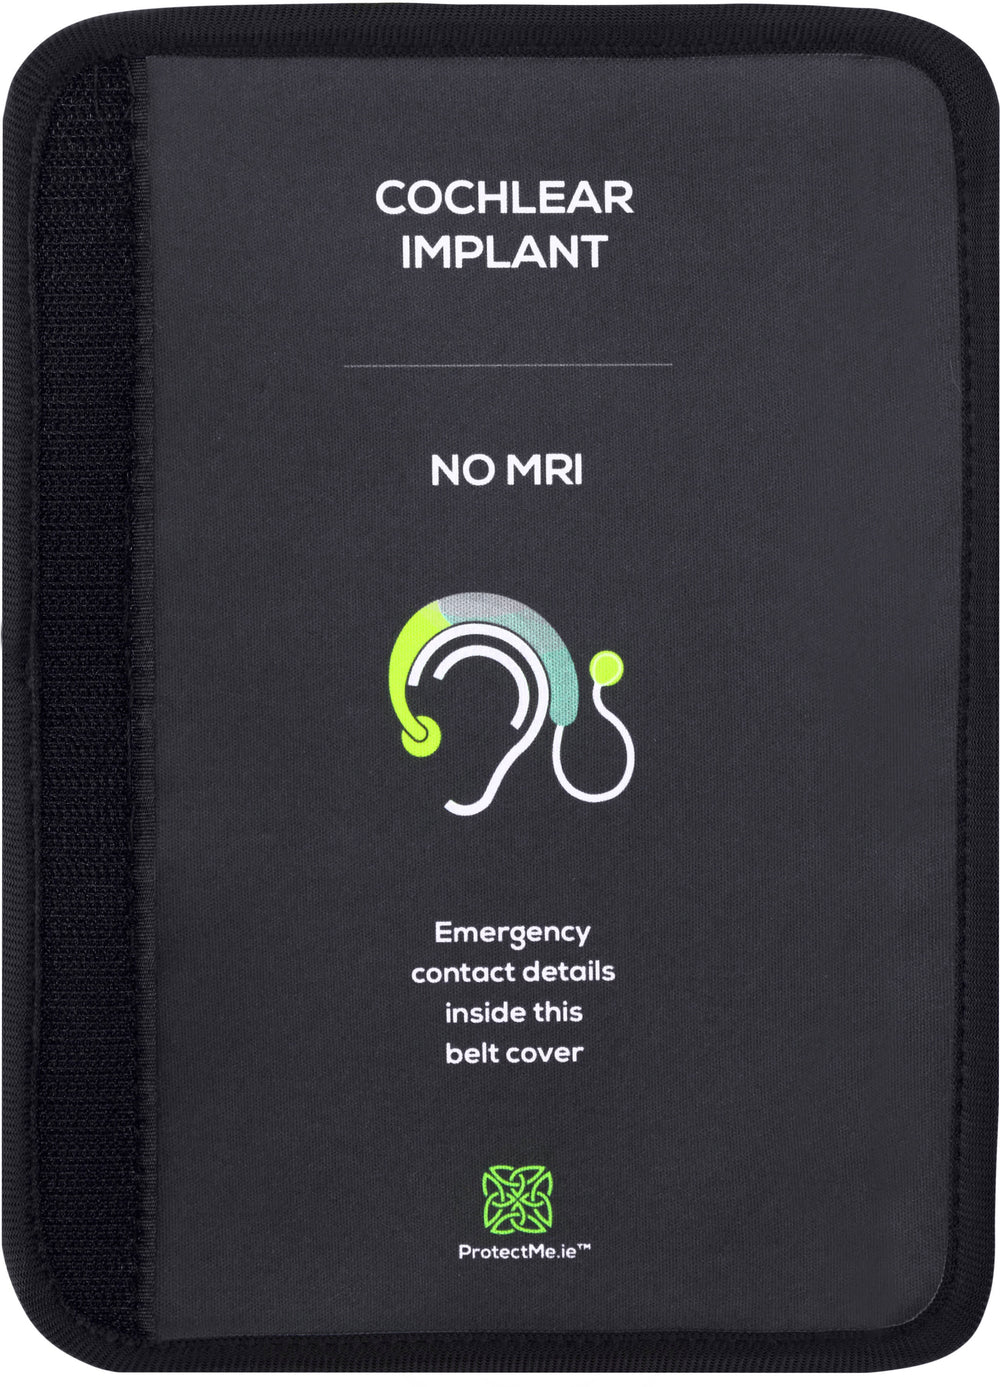 Protect Me - Seatbelt Cover - Individual with Cochlear Implant NO MRI - Black_1